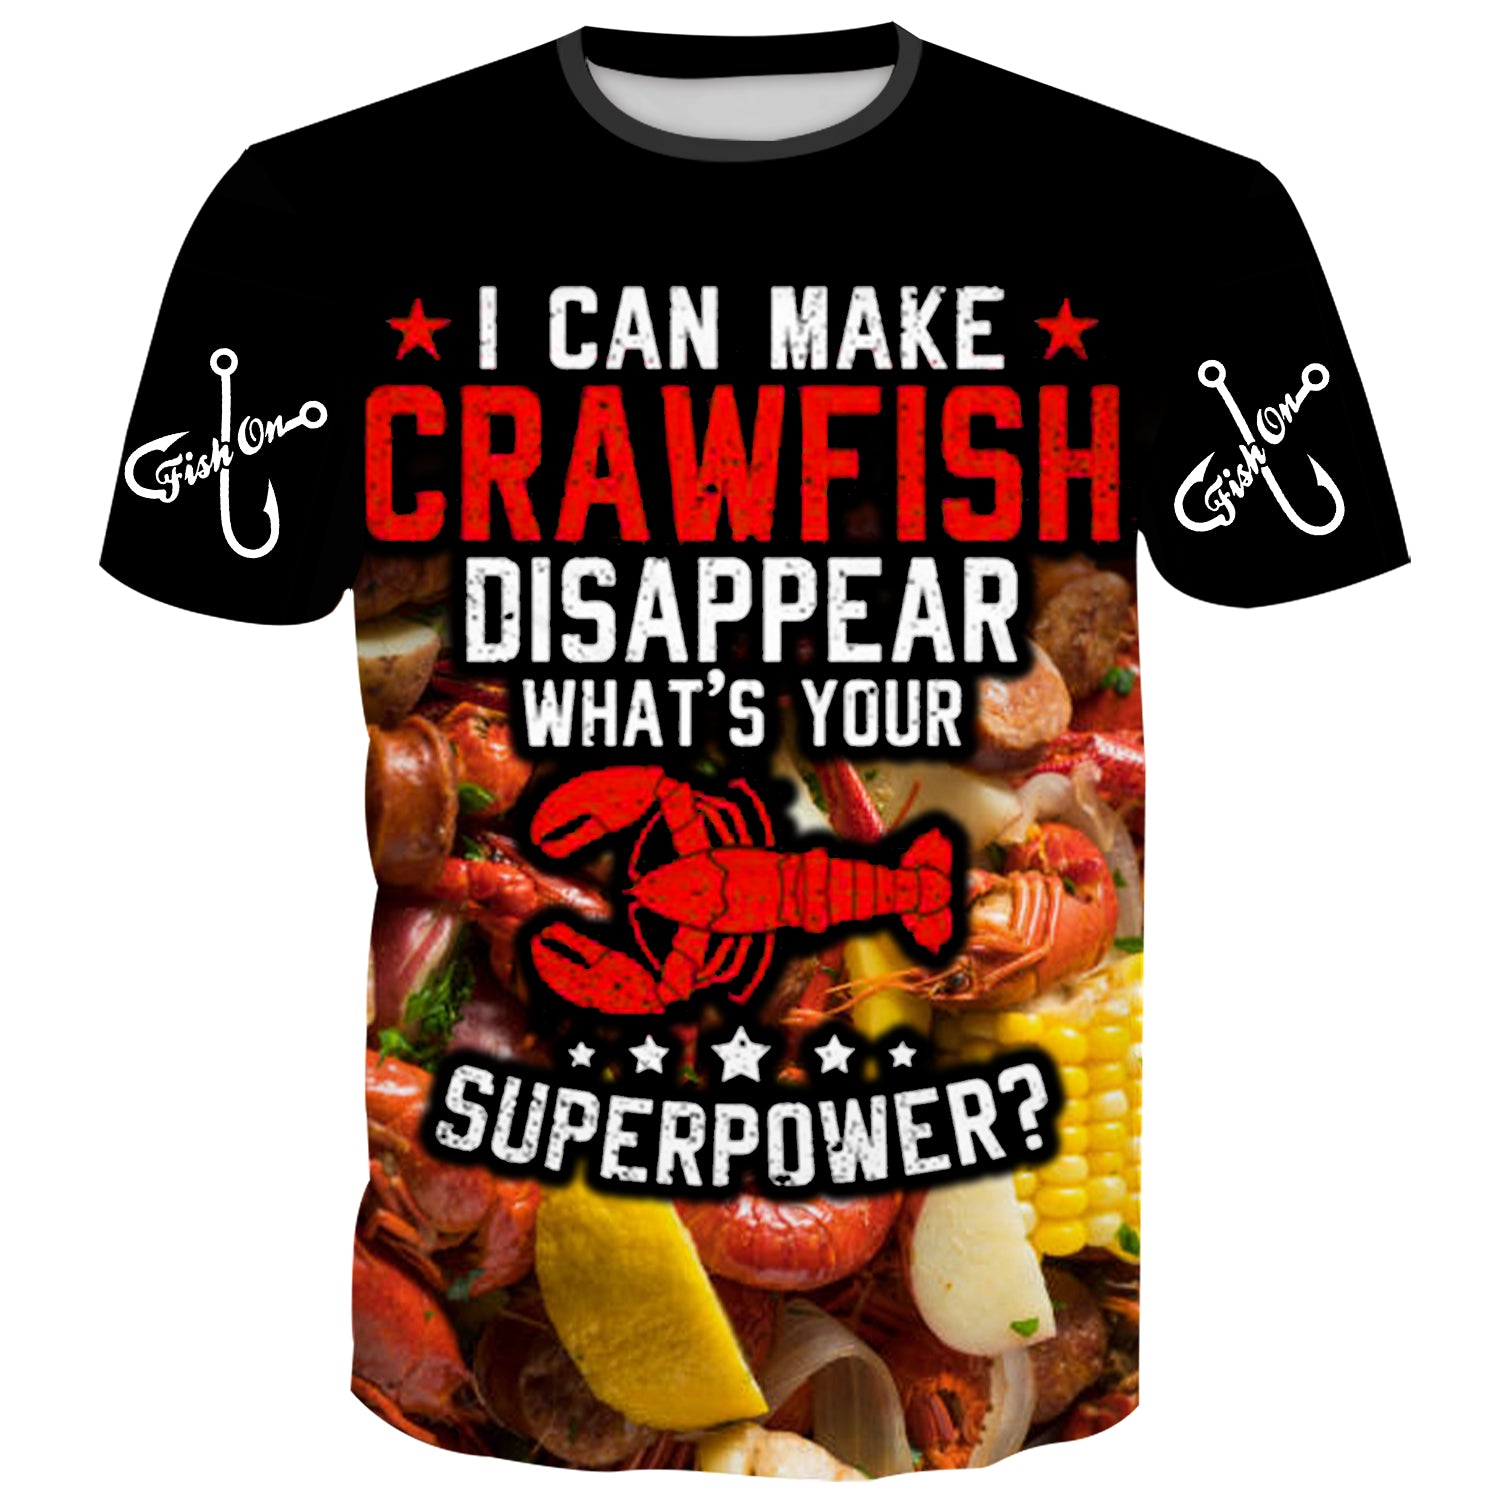 I can make Crawfish disappear, What's your superpower? - T-Shirt